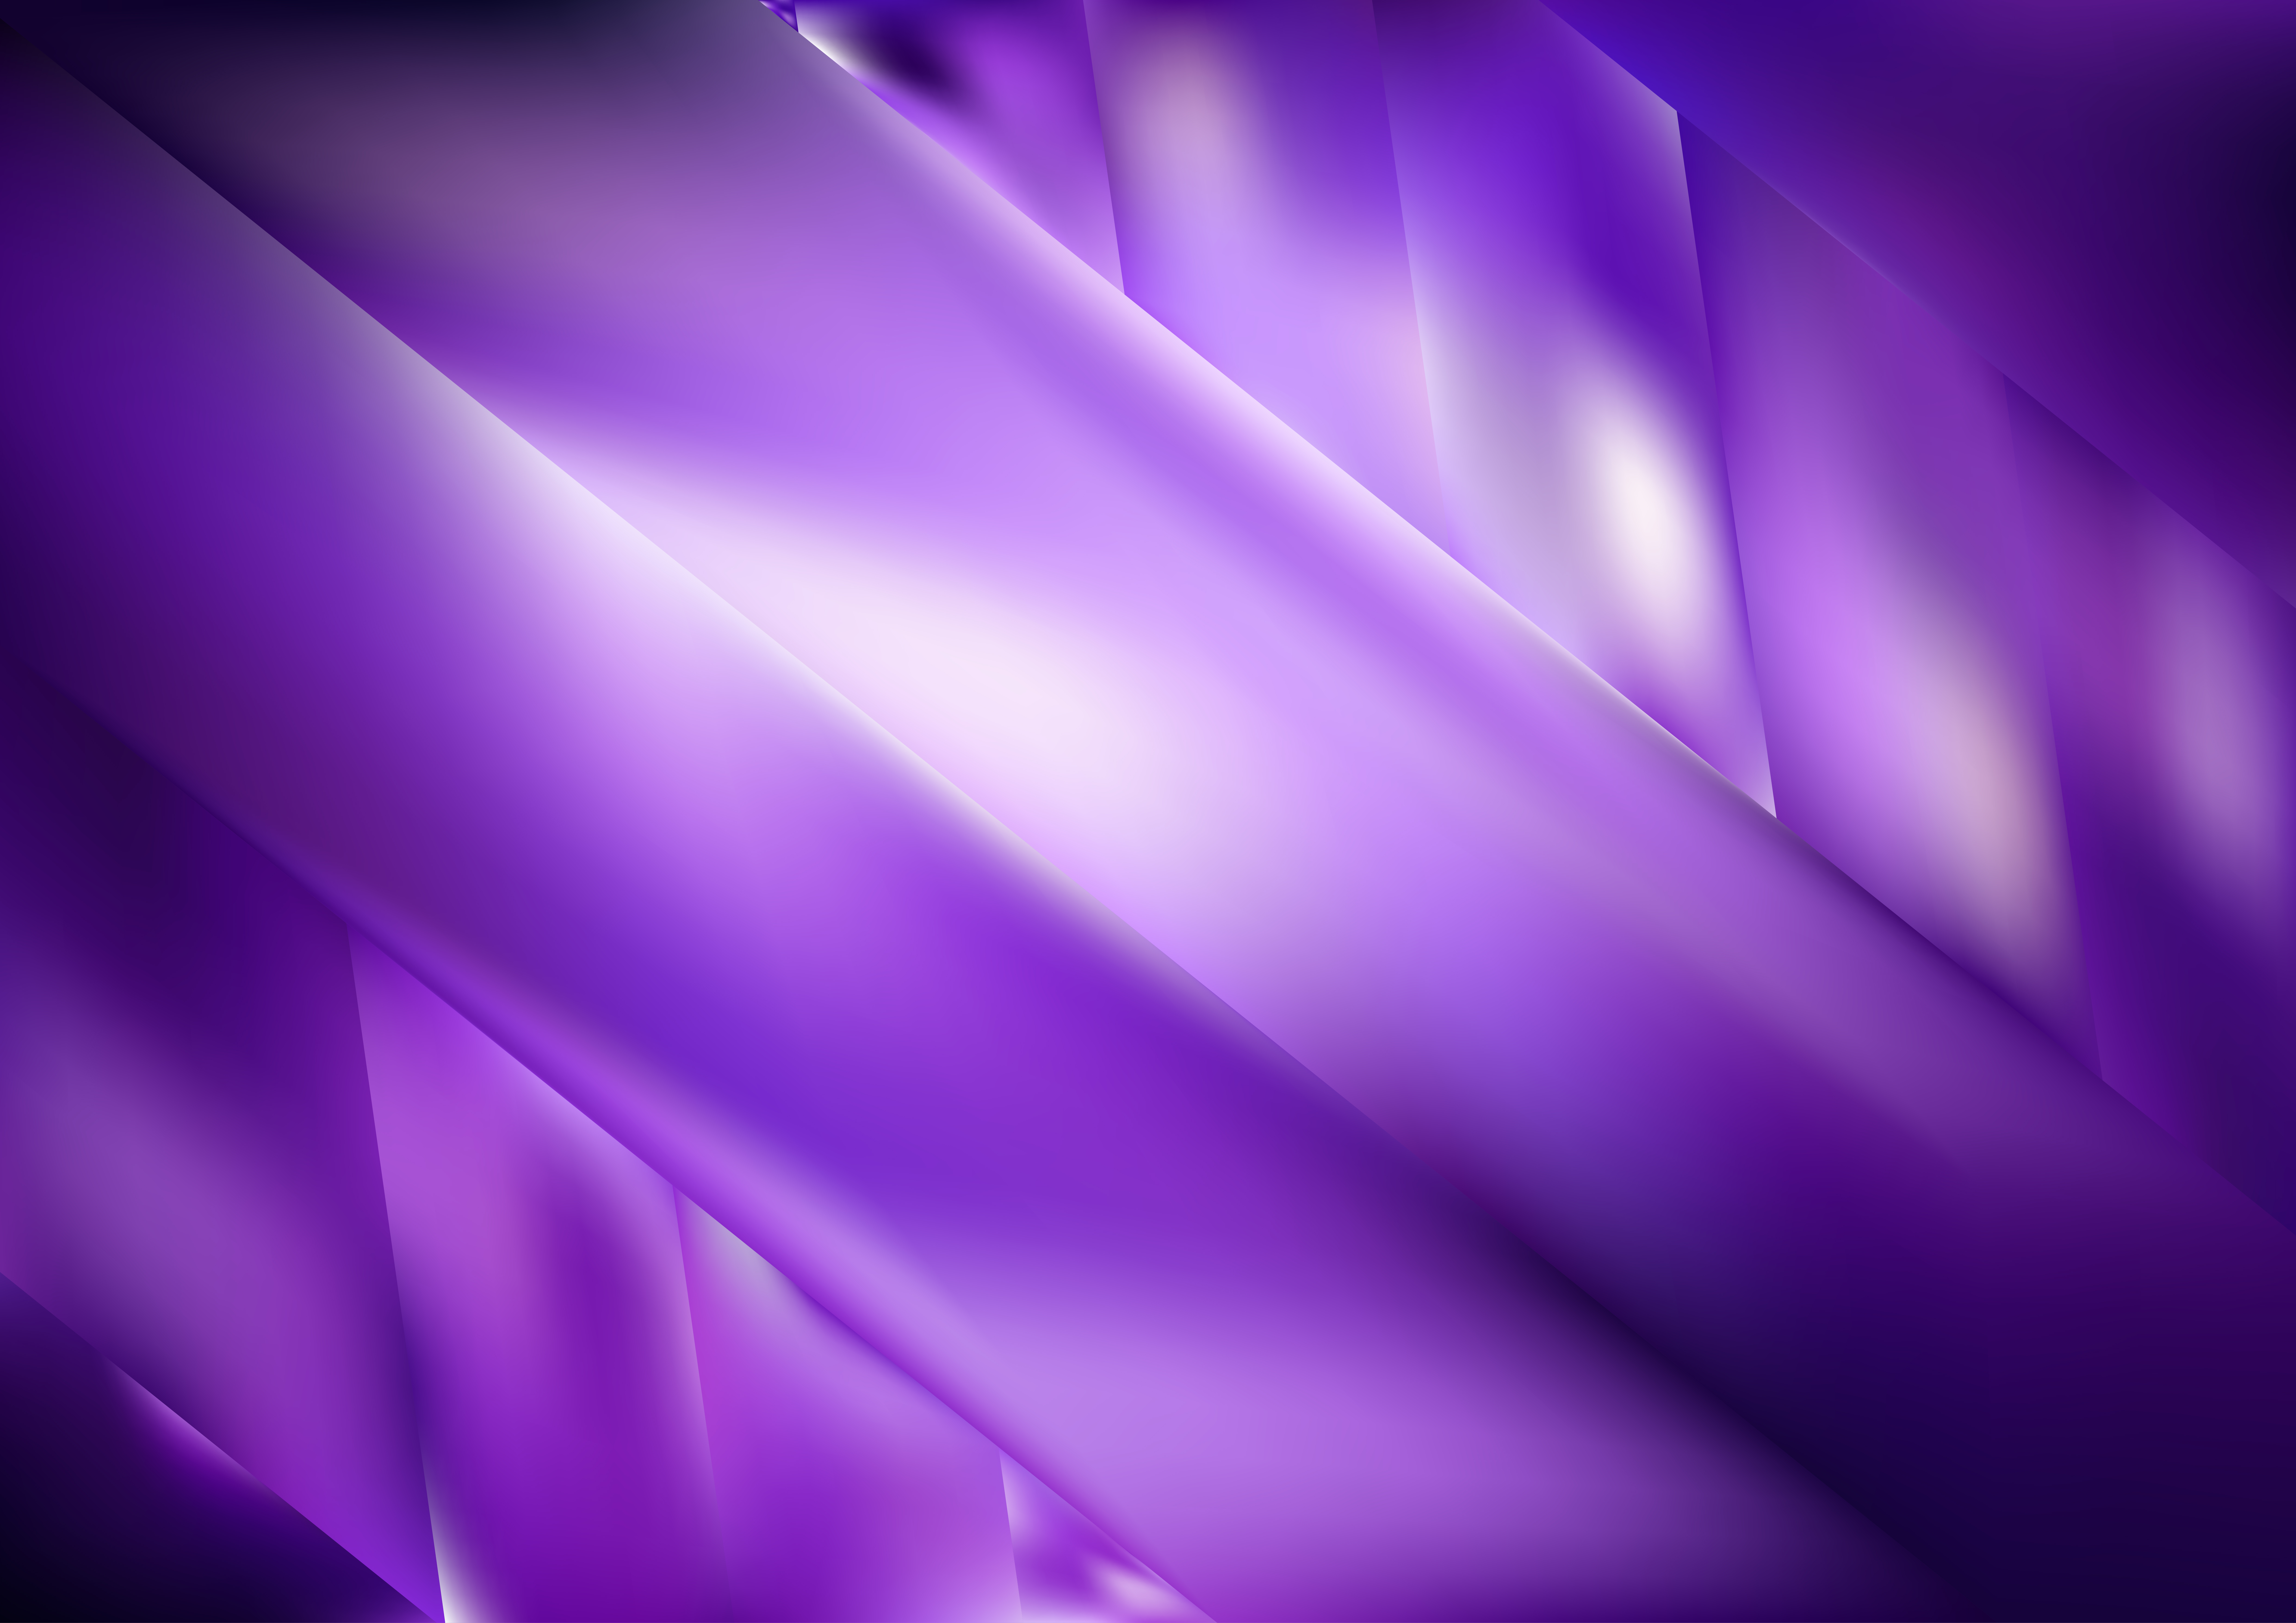 Free Abstract Shiny Violet Background Vector Image